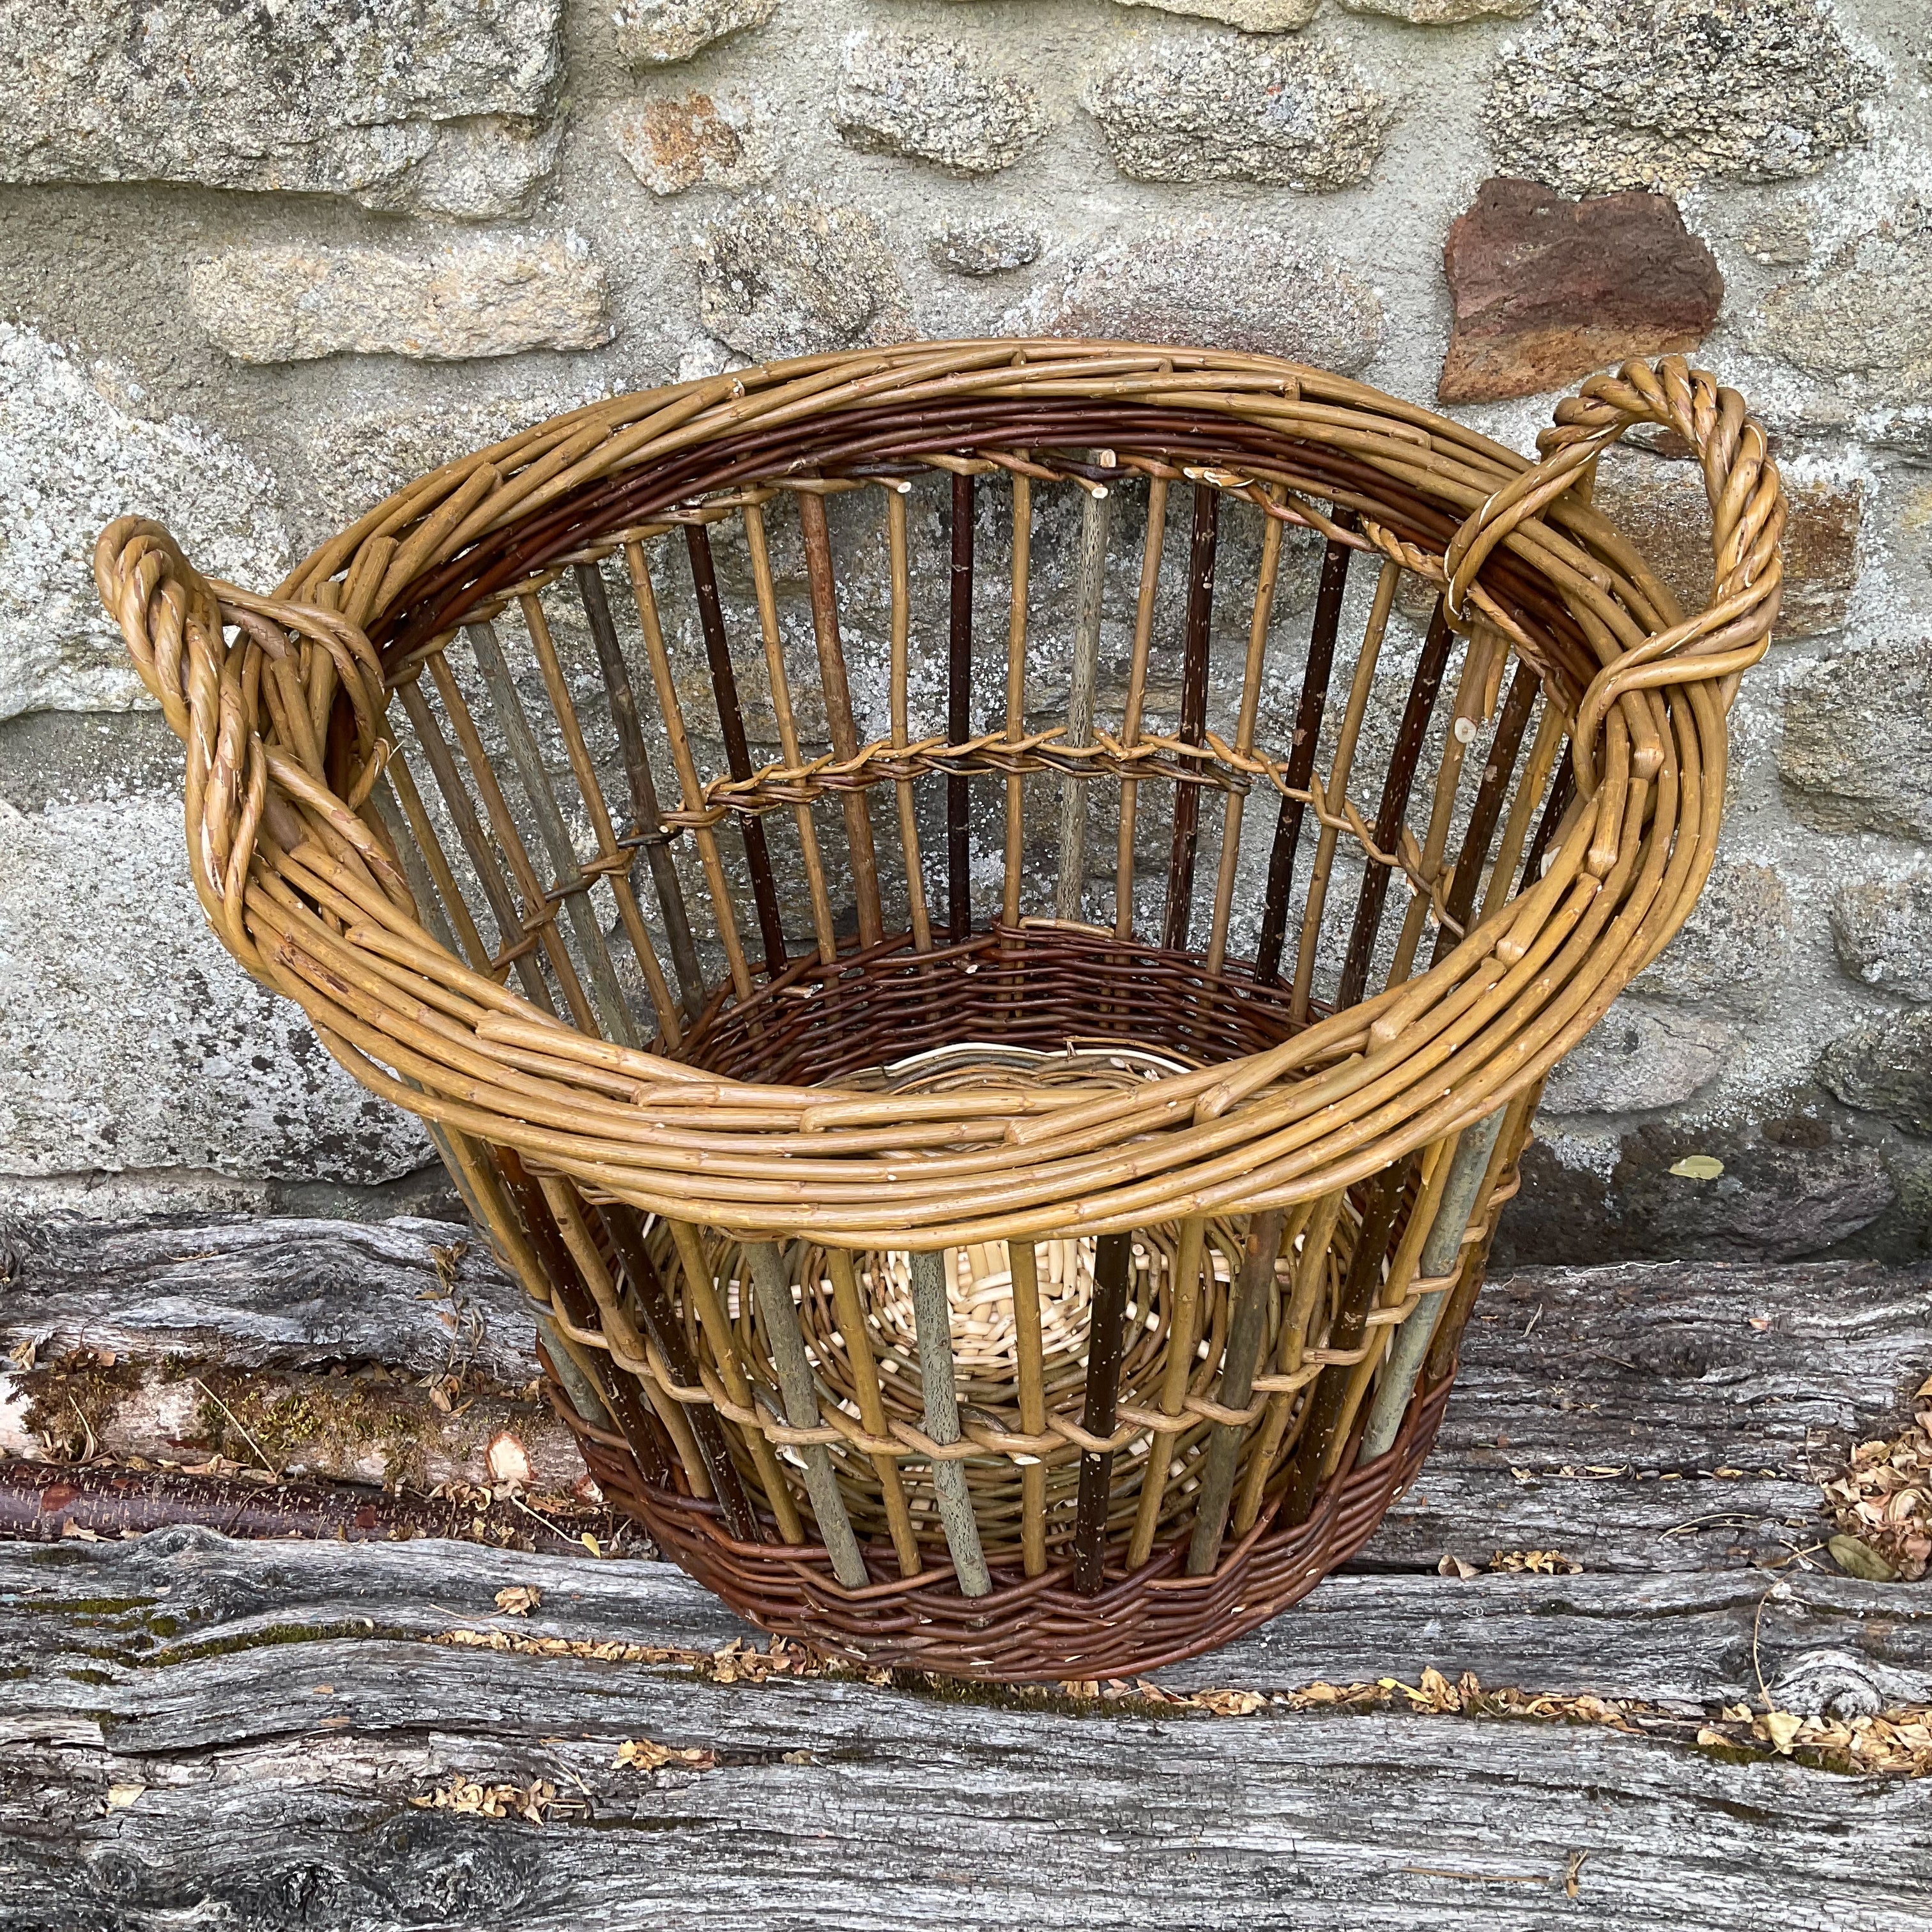 Willow can basket against a stone wall